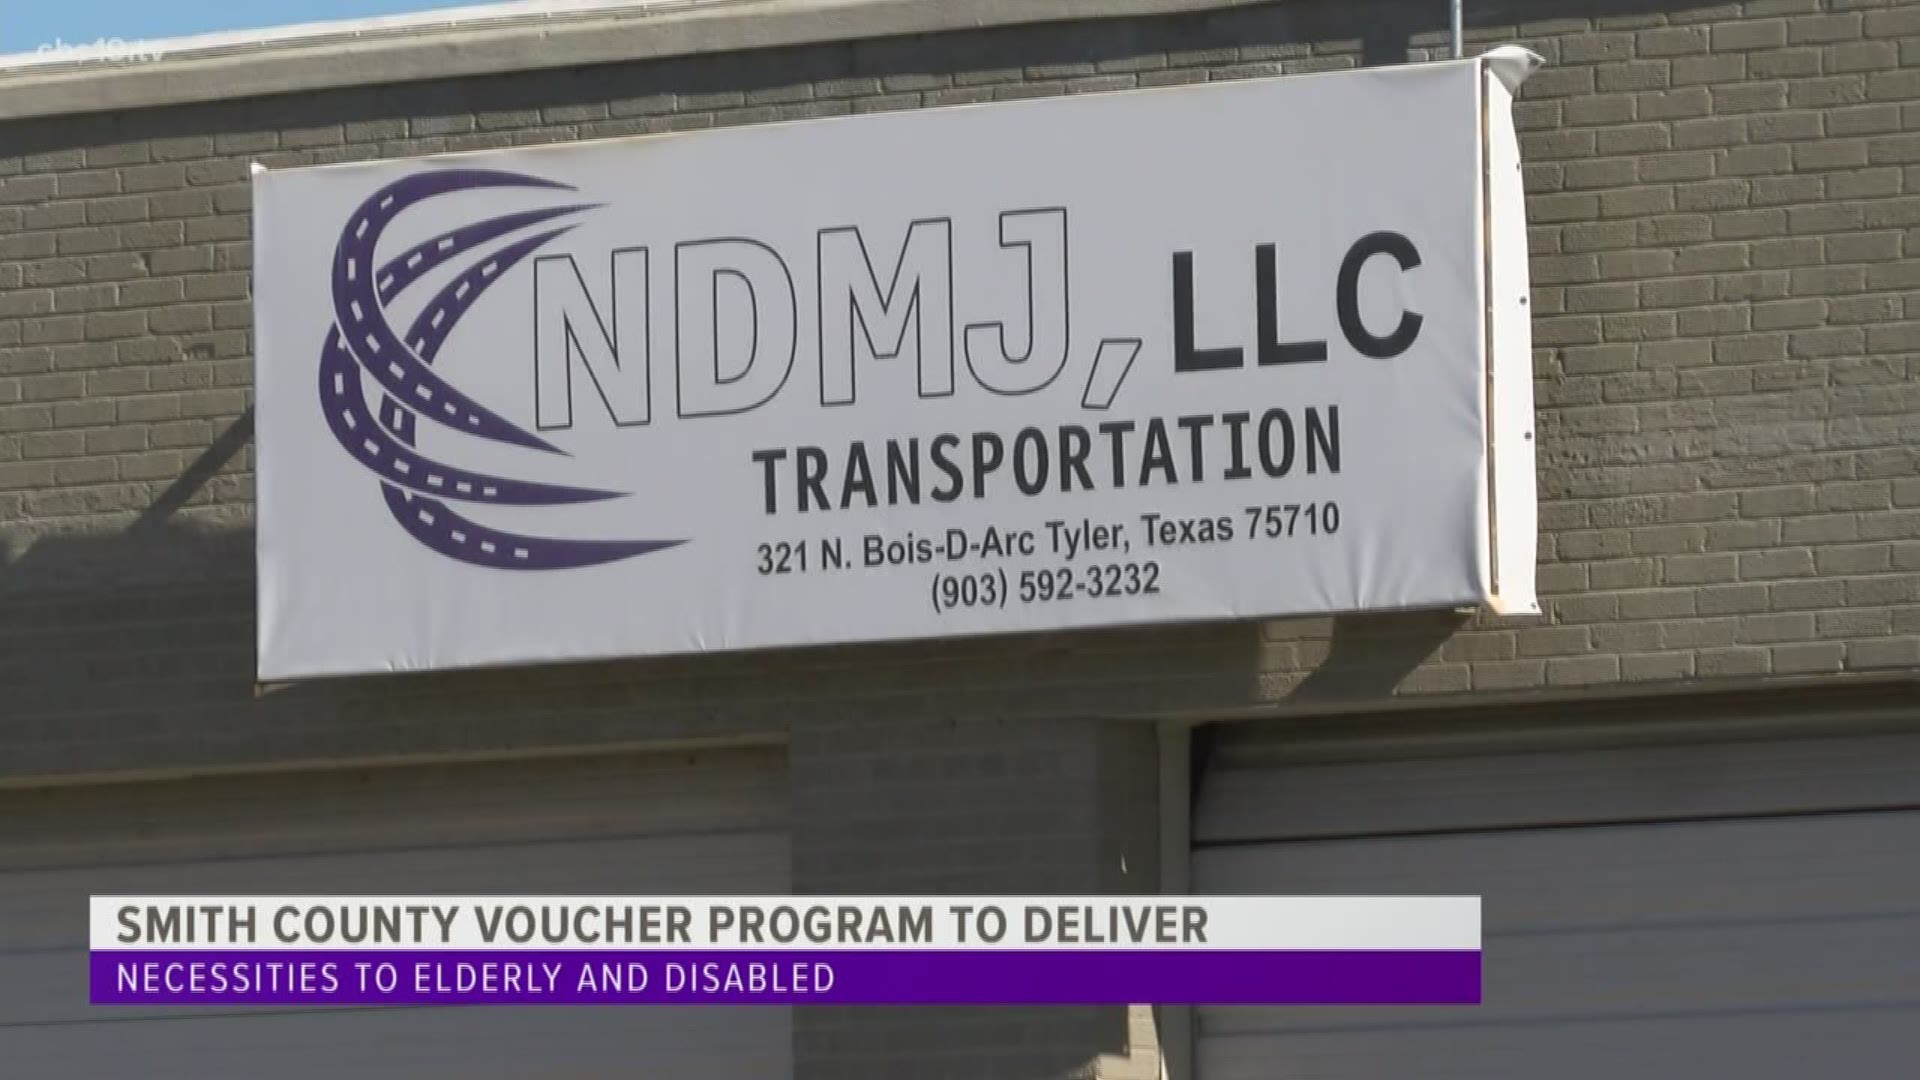 NDMJ Transportation and Smith County are teaming up to use the voucher program to deliver essential products to elderly and disabled.